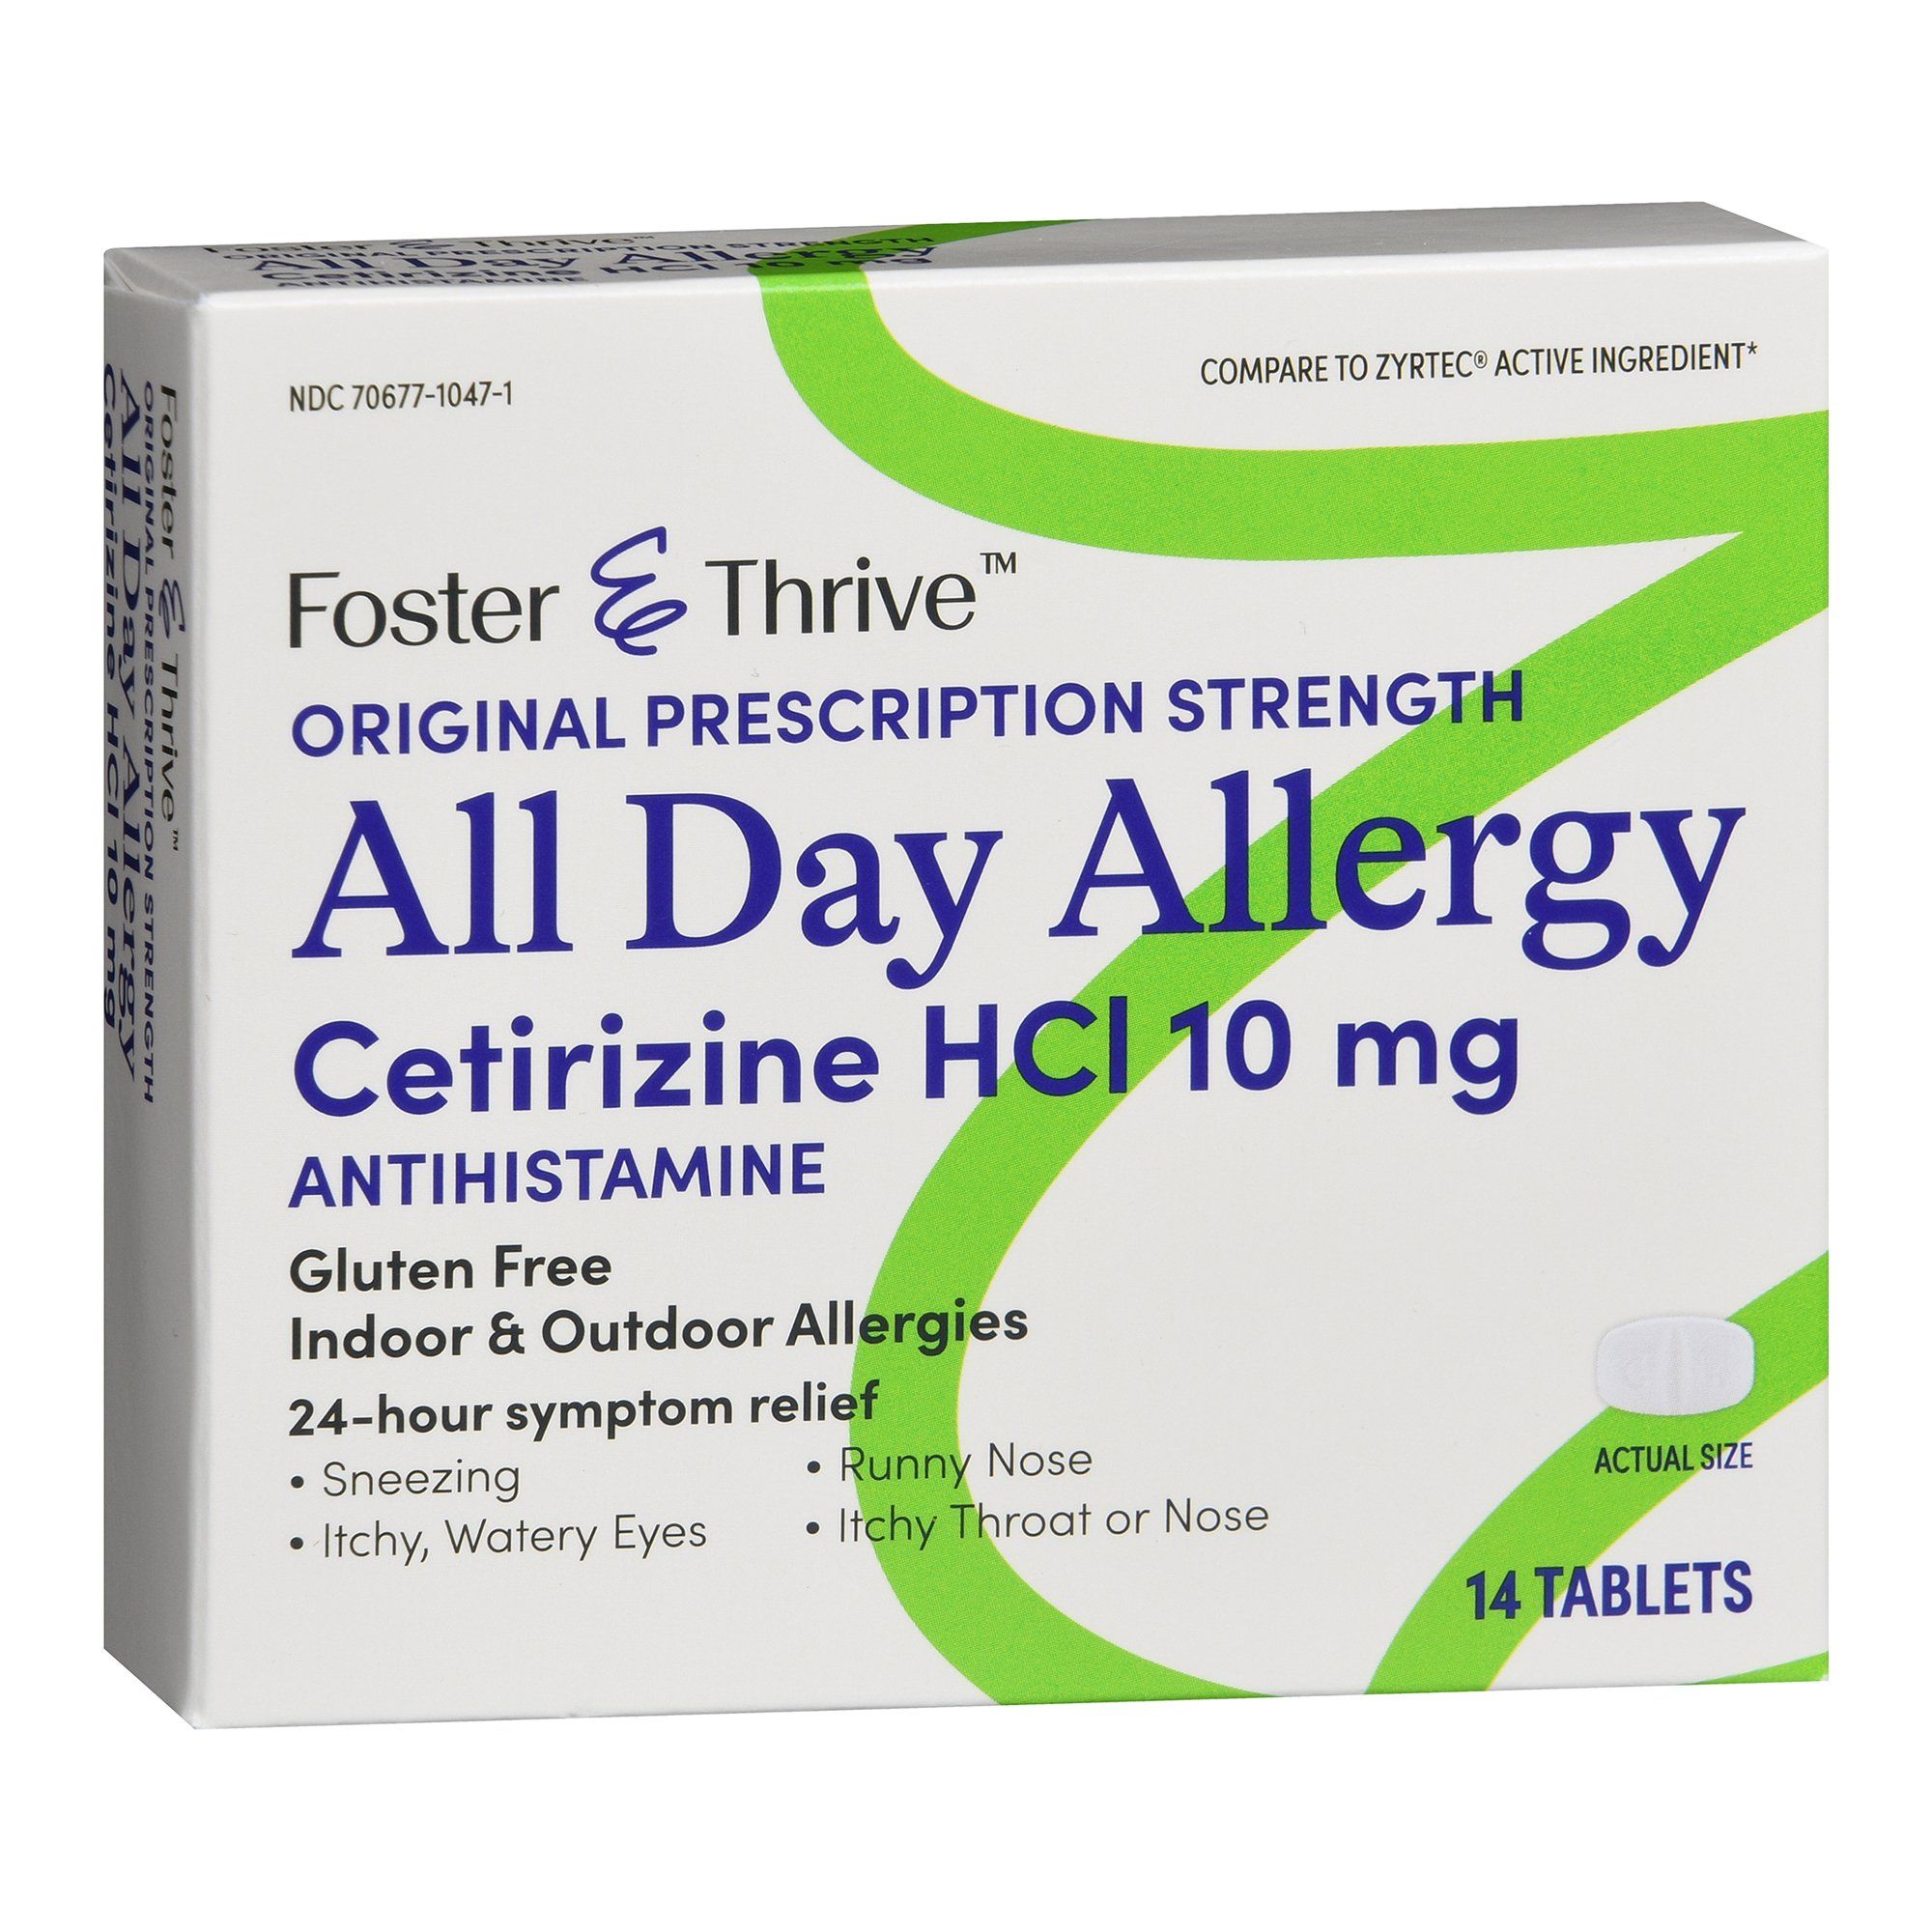 Foster & Thrive Original Prescription Strength All Day Allergy Cetirizine HCl Tablets,  10 mg - 14 ct